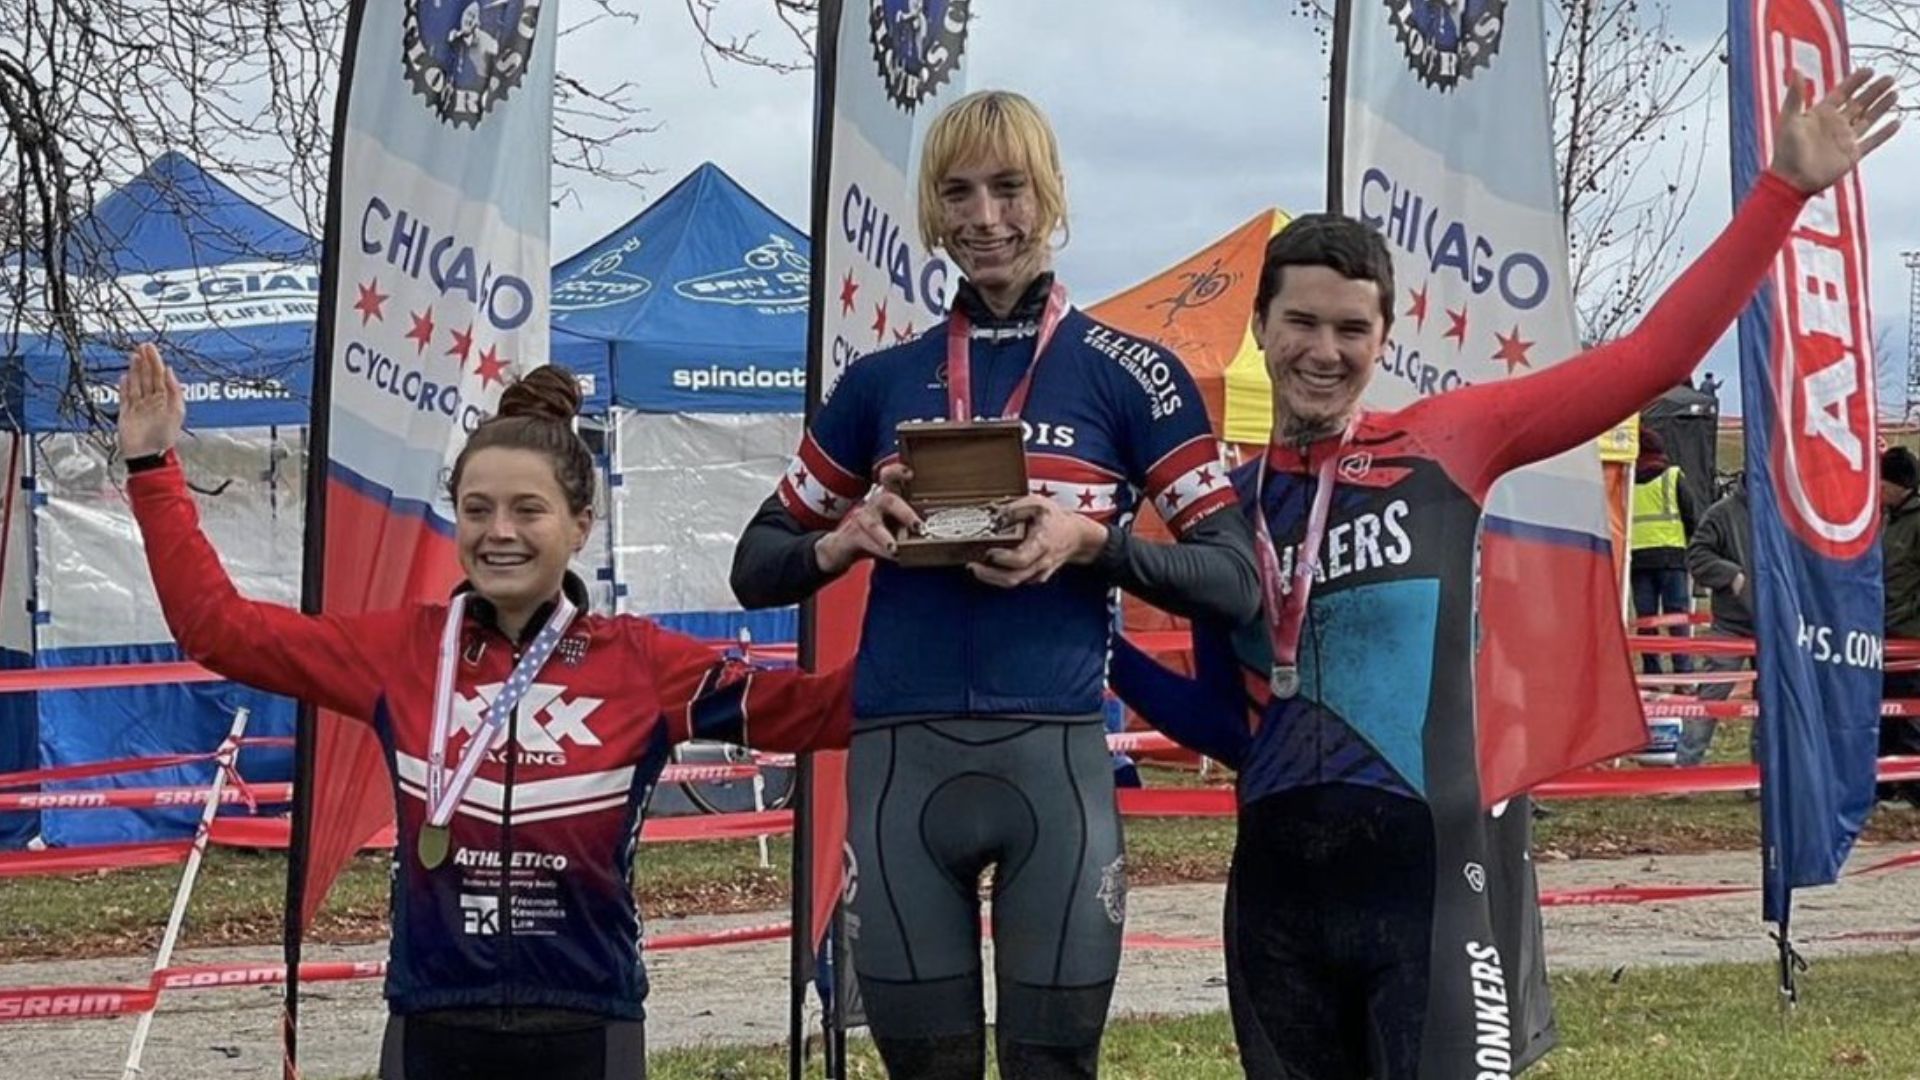 Males Seize Gold and Silver At Women's Cycling Championship In Illinois ...